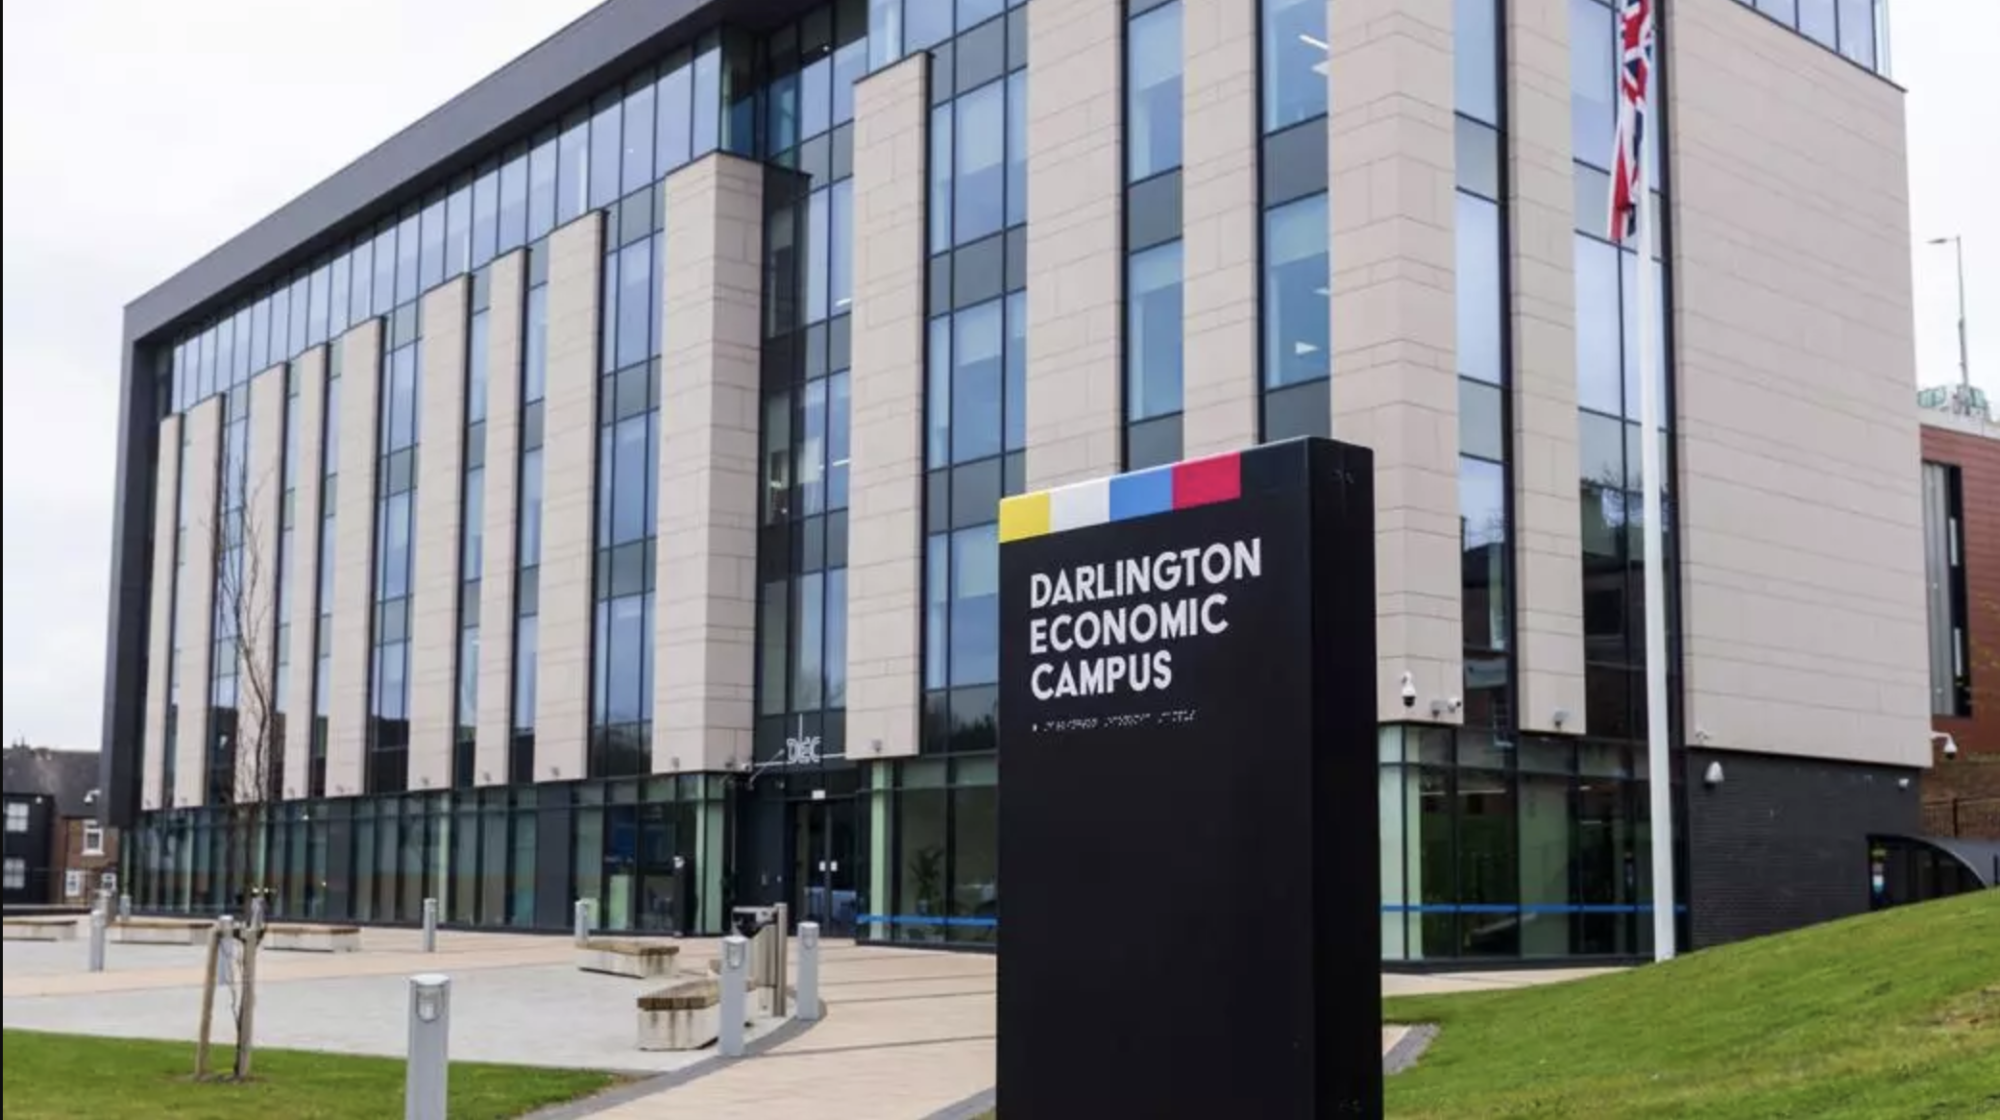 Government Property Agency Purchases Land for New Darlington Hub